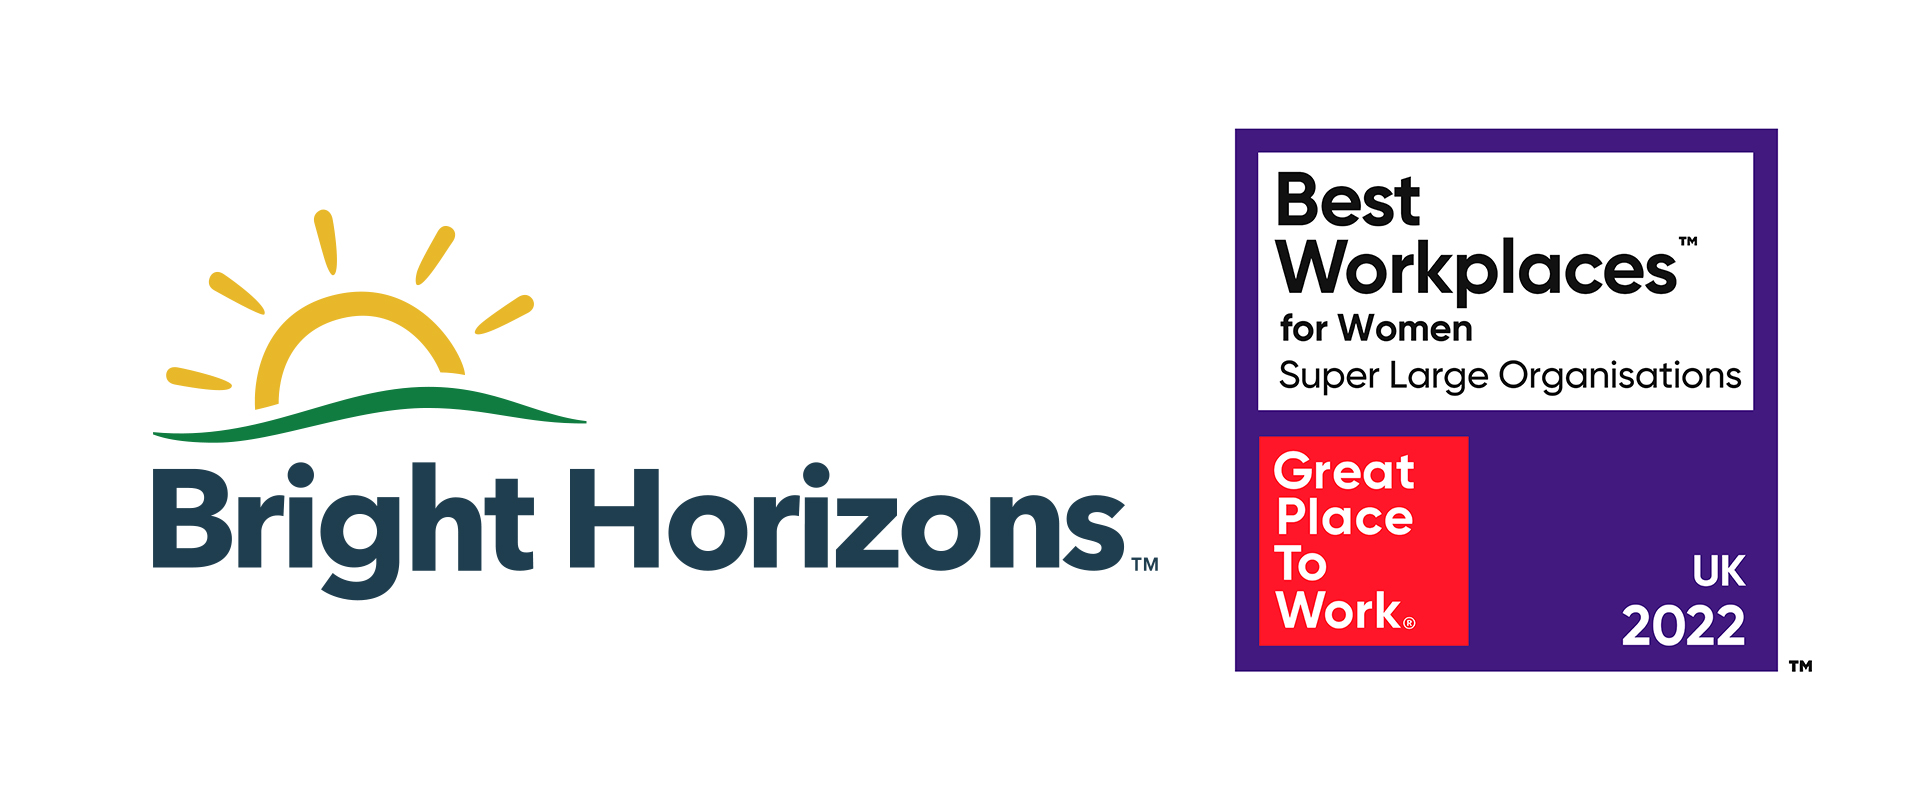 Bright Horizons completes a hat-trick of 2022 UK’s Best Workplaces™ accolades 